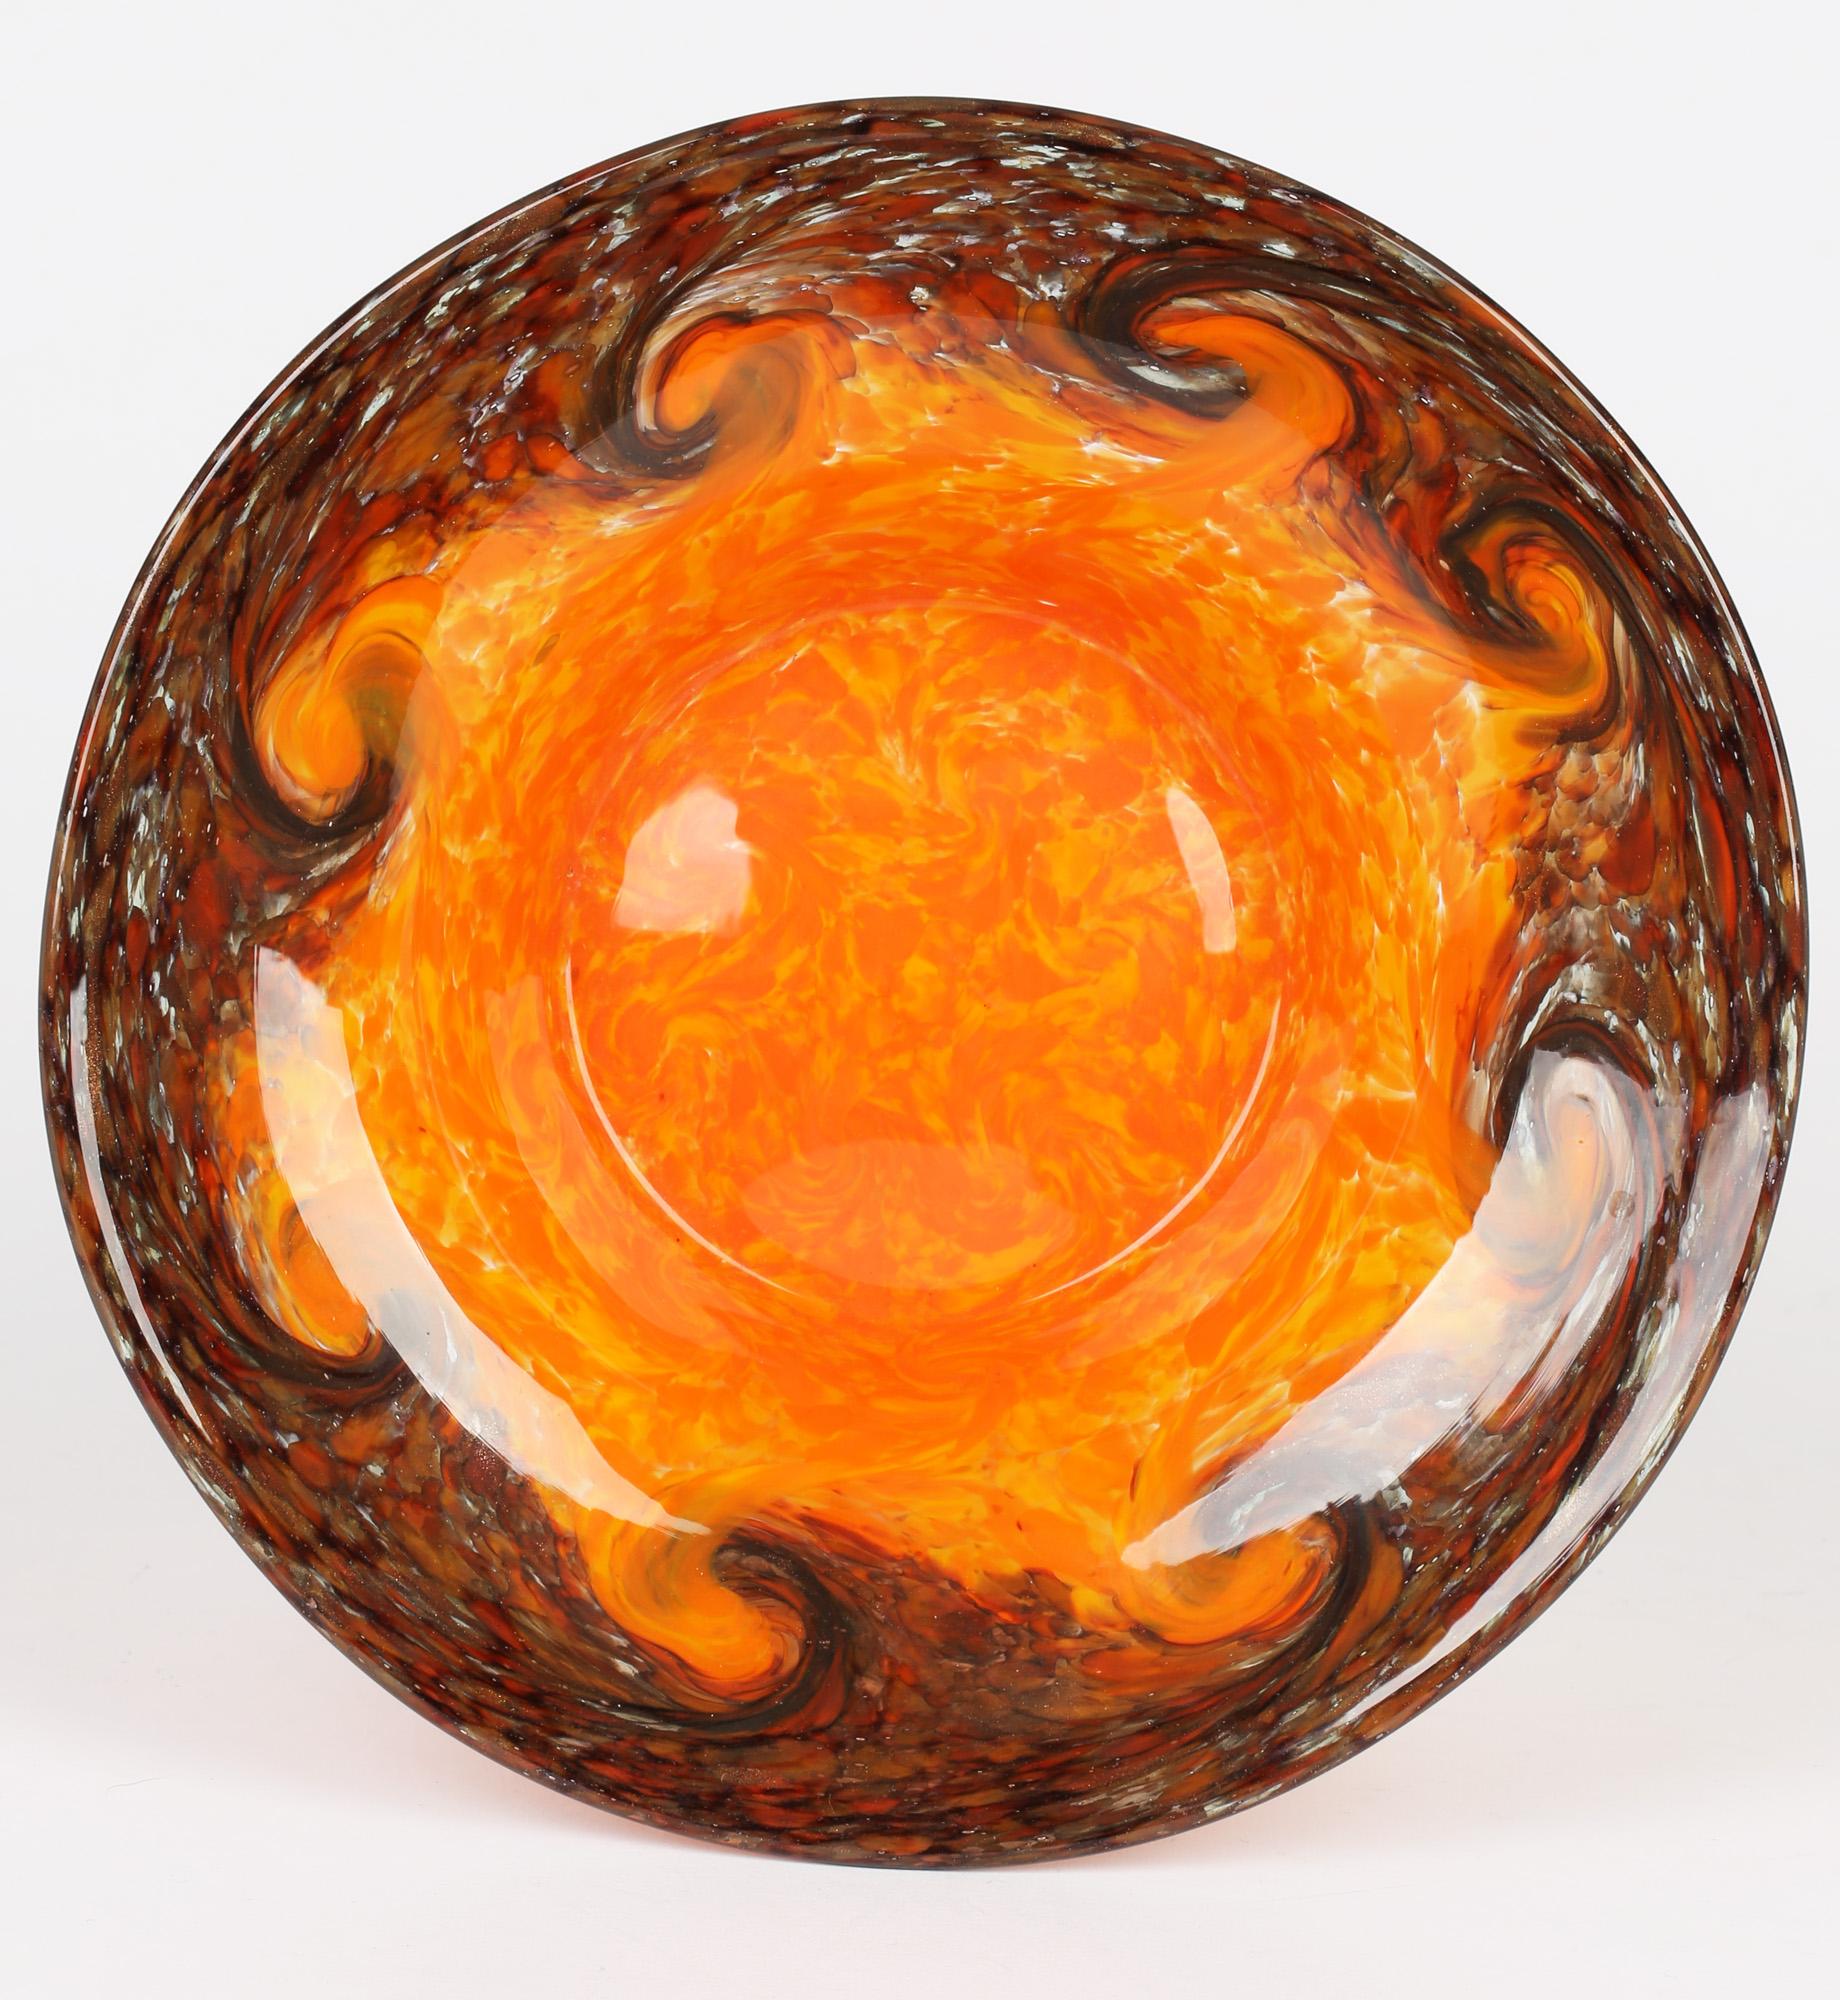 A good quality Scottish Art Deco glass bowl with bright orange and brown swirling patterning by Monart. The rounded art glass bowl has a recessed centre with a wide rim and has a bright mottled orange and yellow glass centre with a swirling pattern